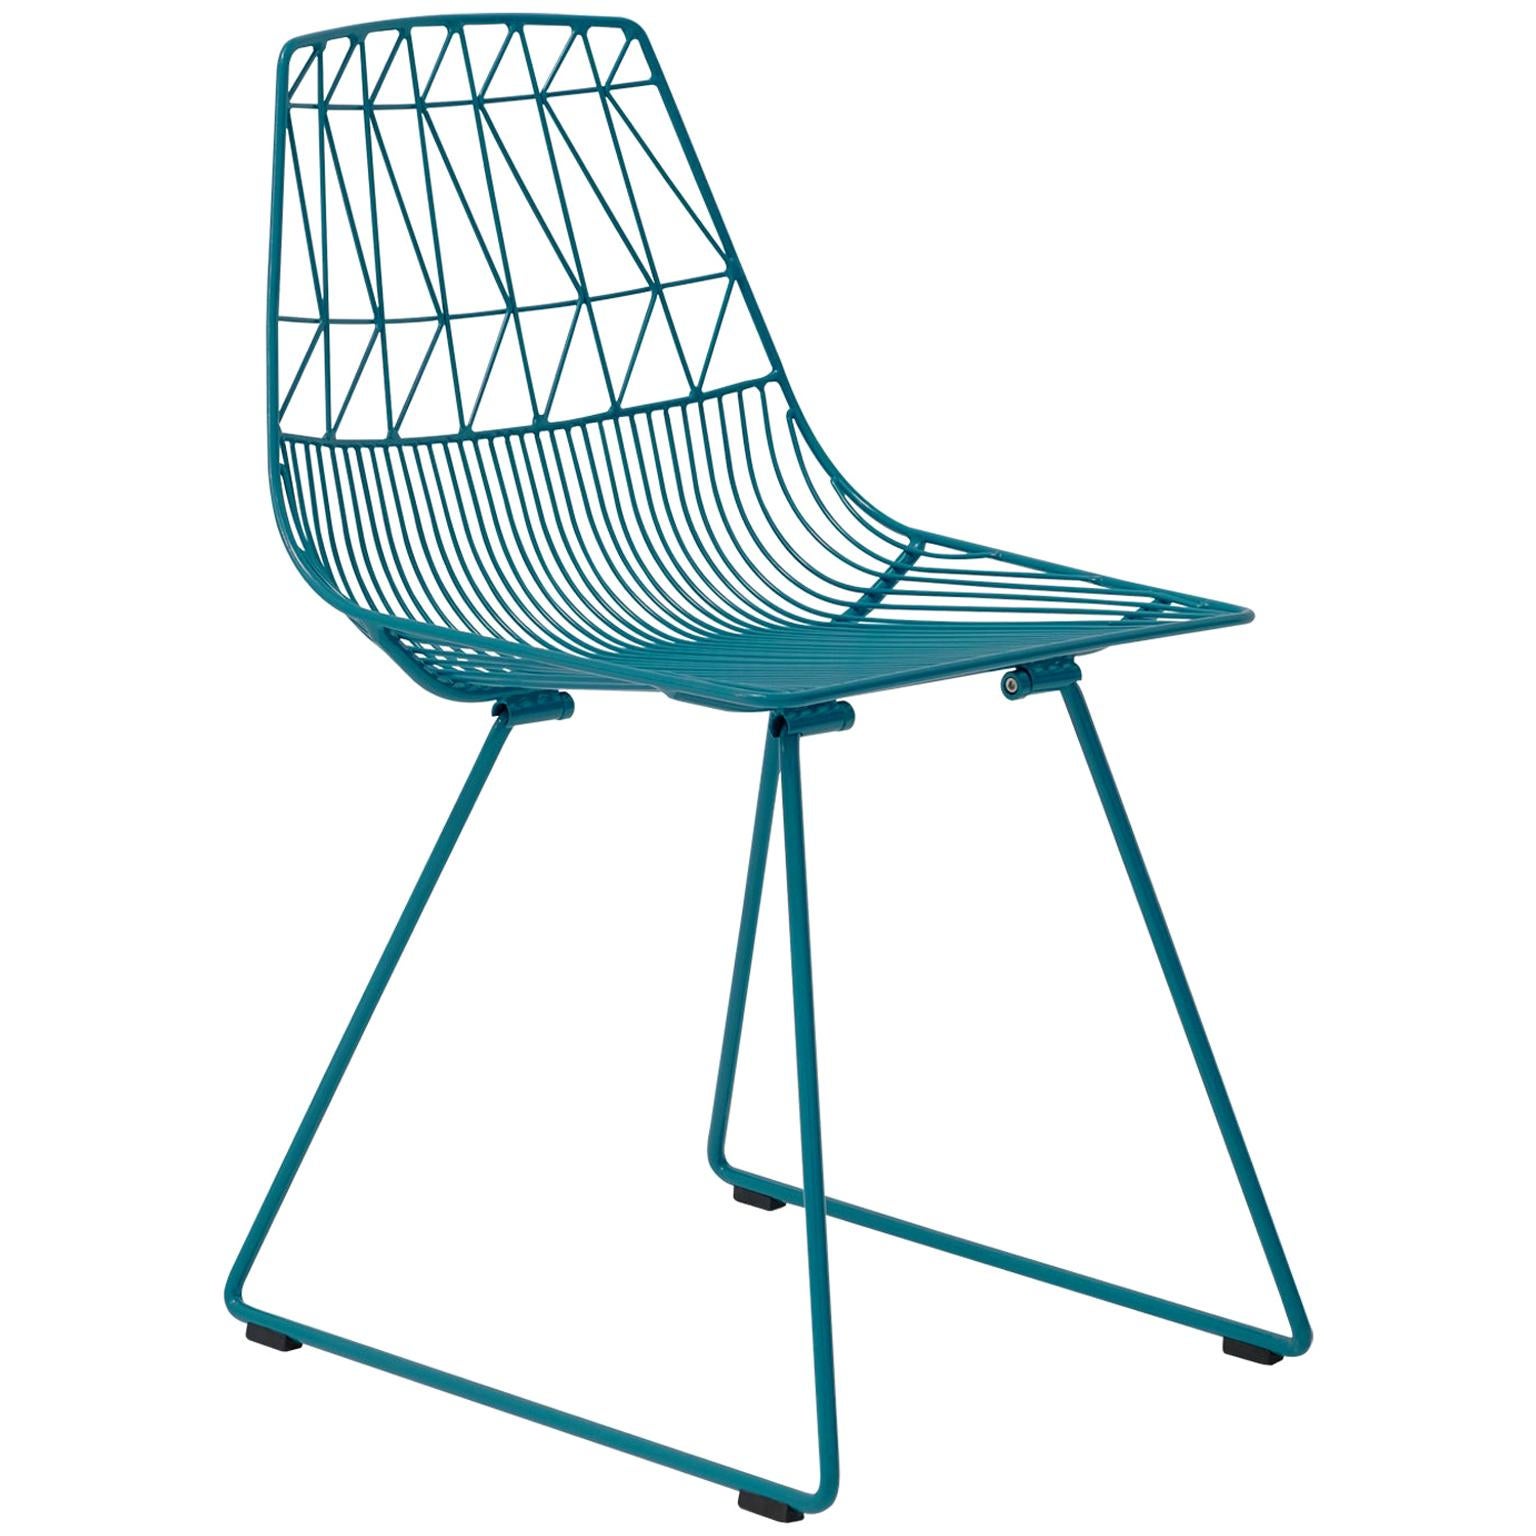 Mid-Century Modern, Minimalist Wire Chair, the Lucy Chair in Peacock Blue For Sale